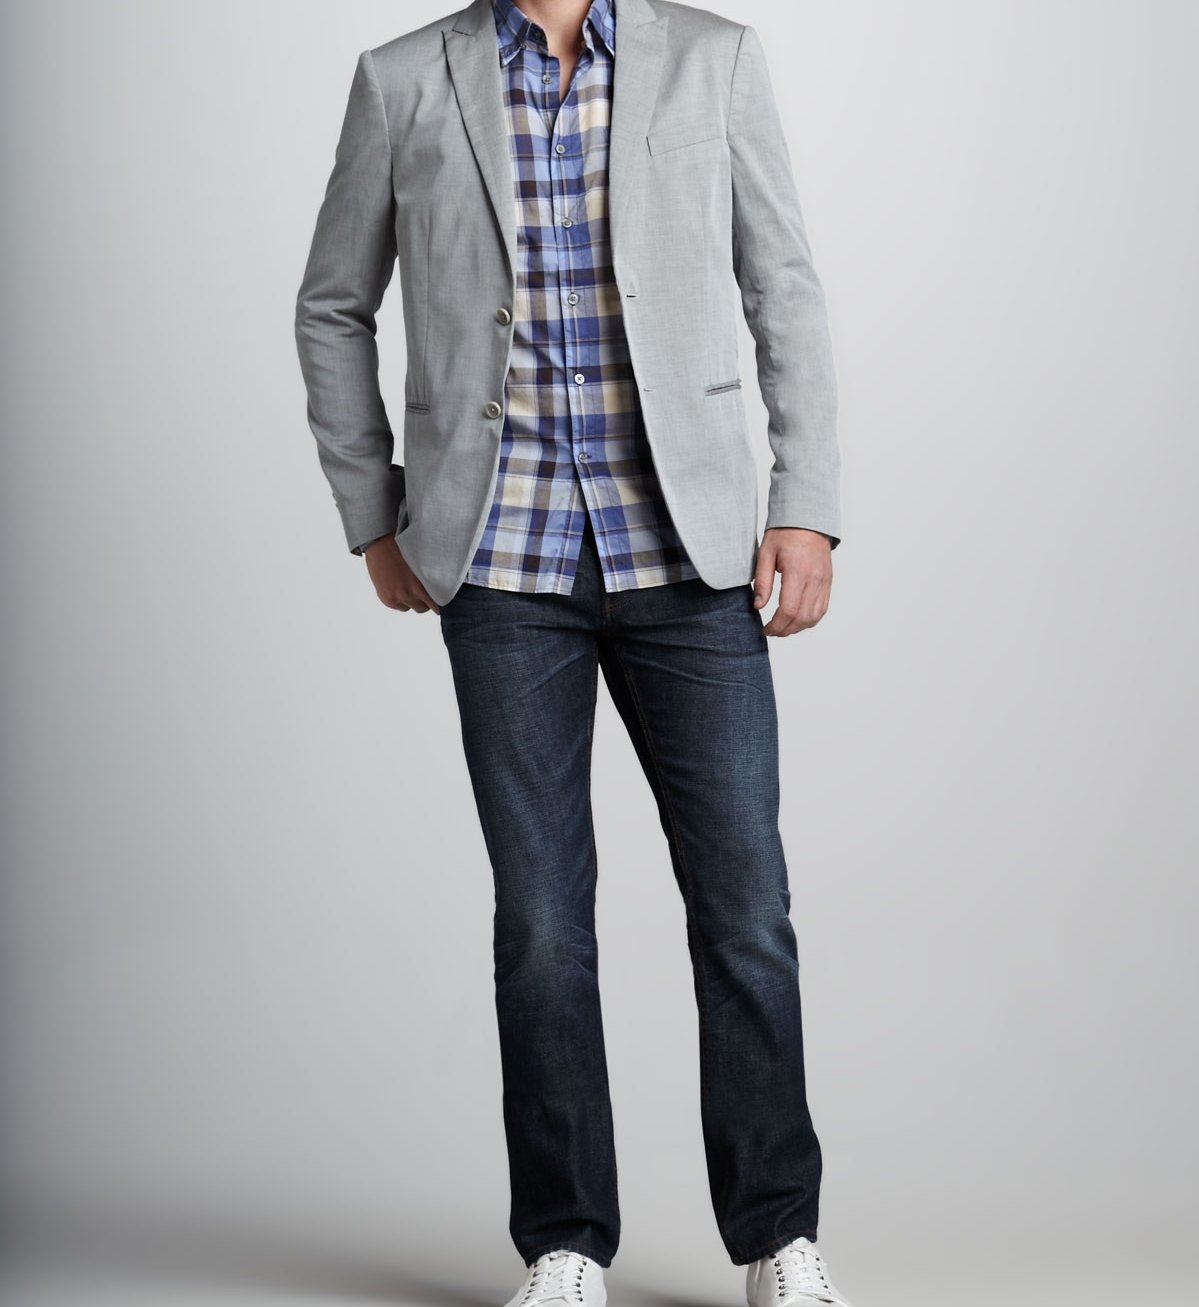 10 Necessary Rules for Wearing a Sport Coat or Suit Jacket with Jeans